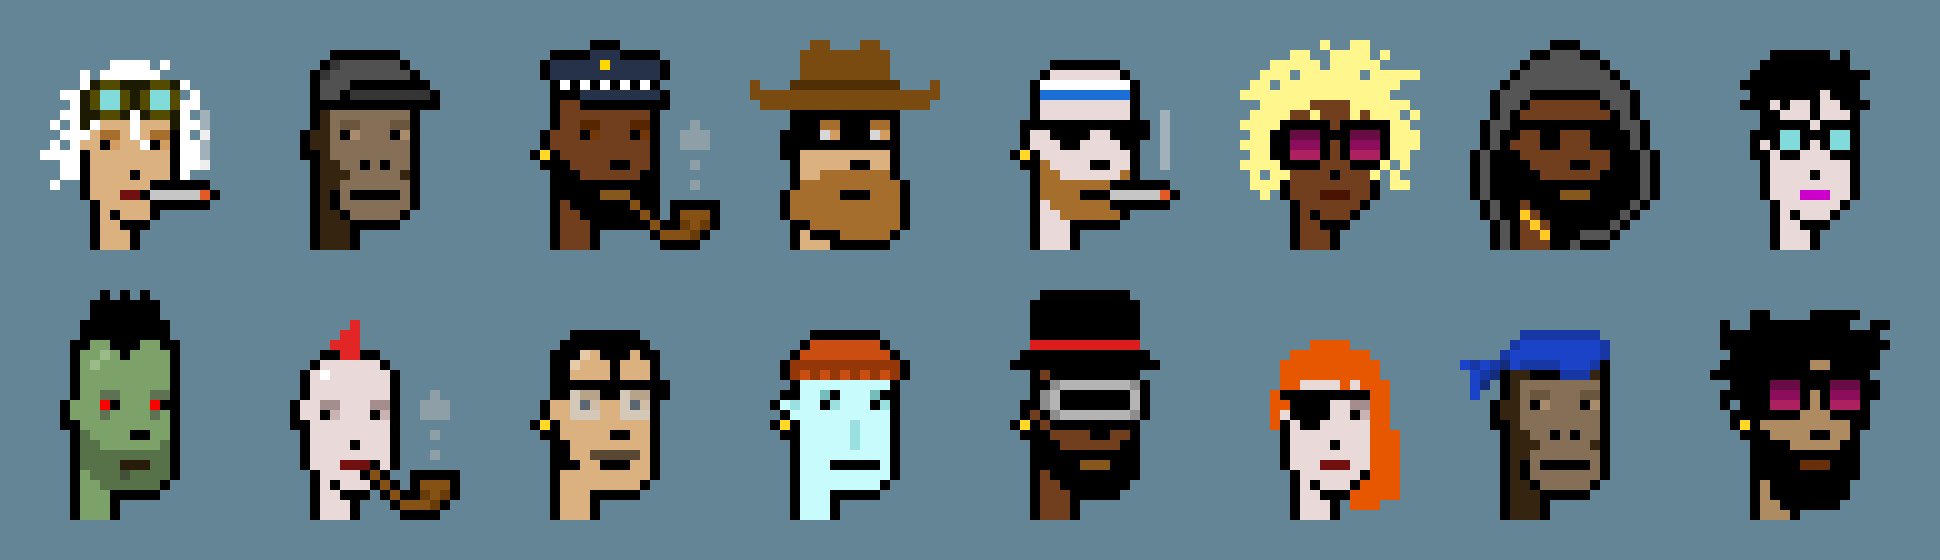 CryptoPunks Price Guide: Why Is This Collection Worth $2 Billion?